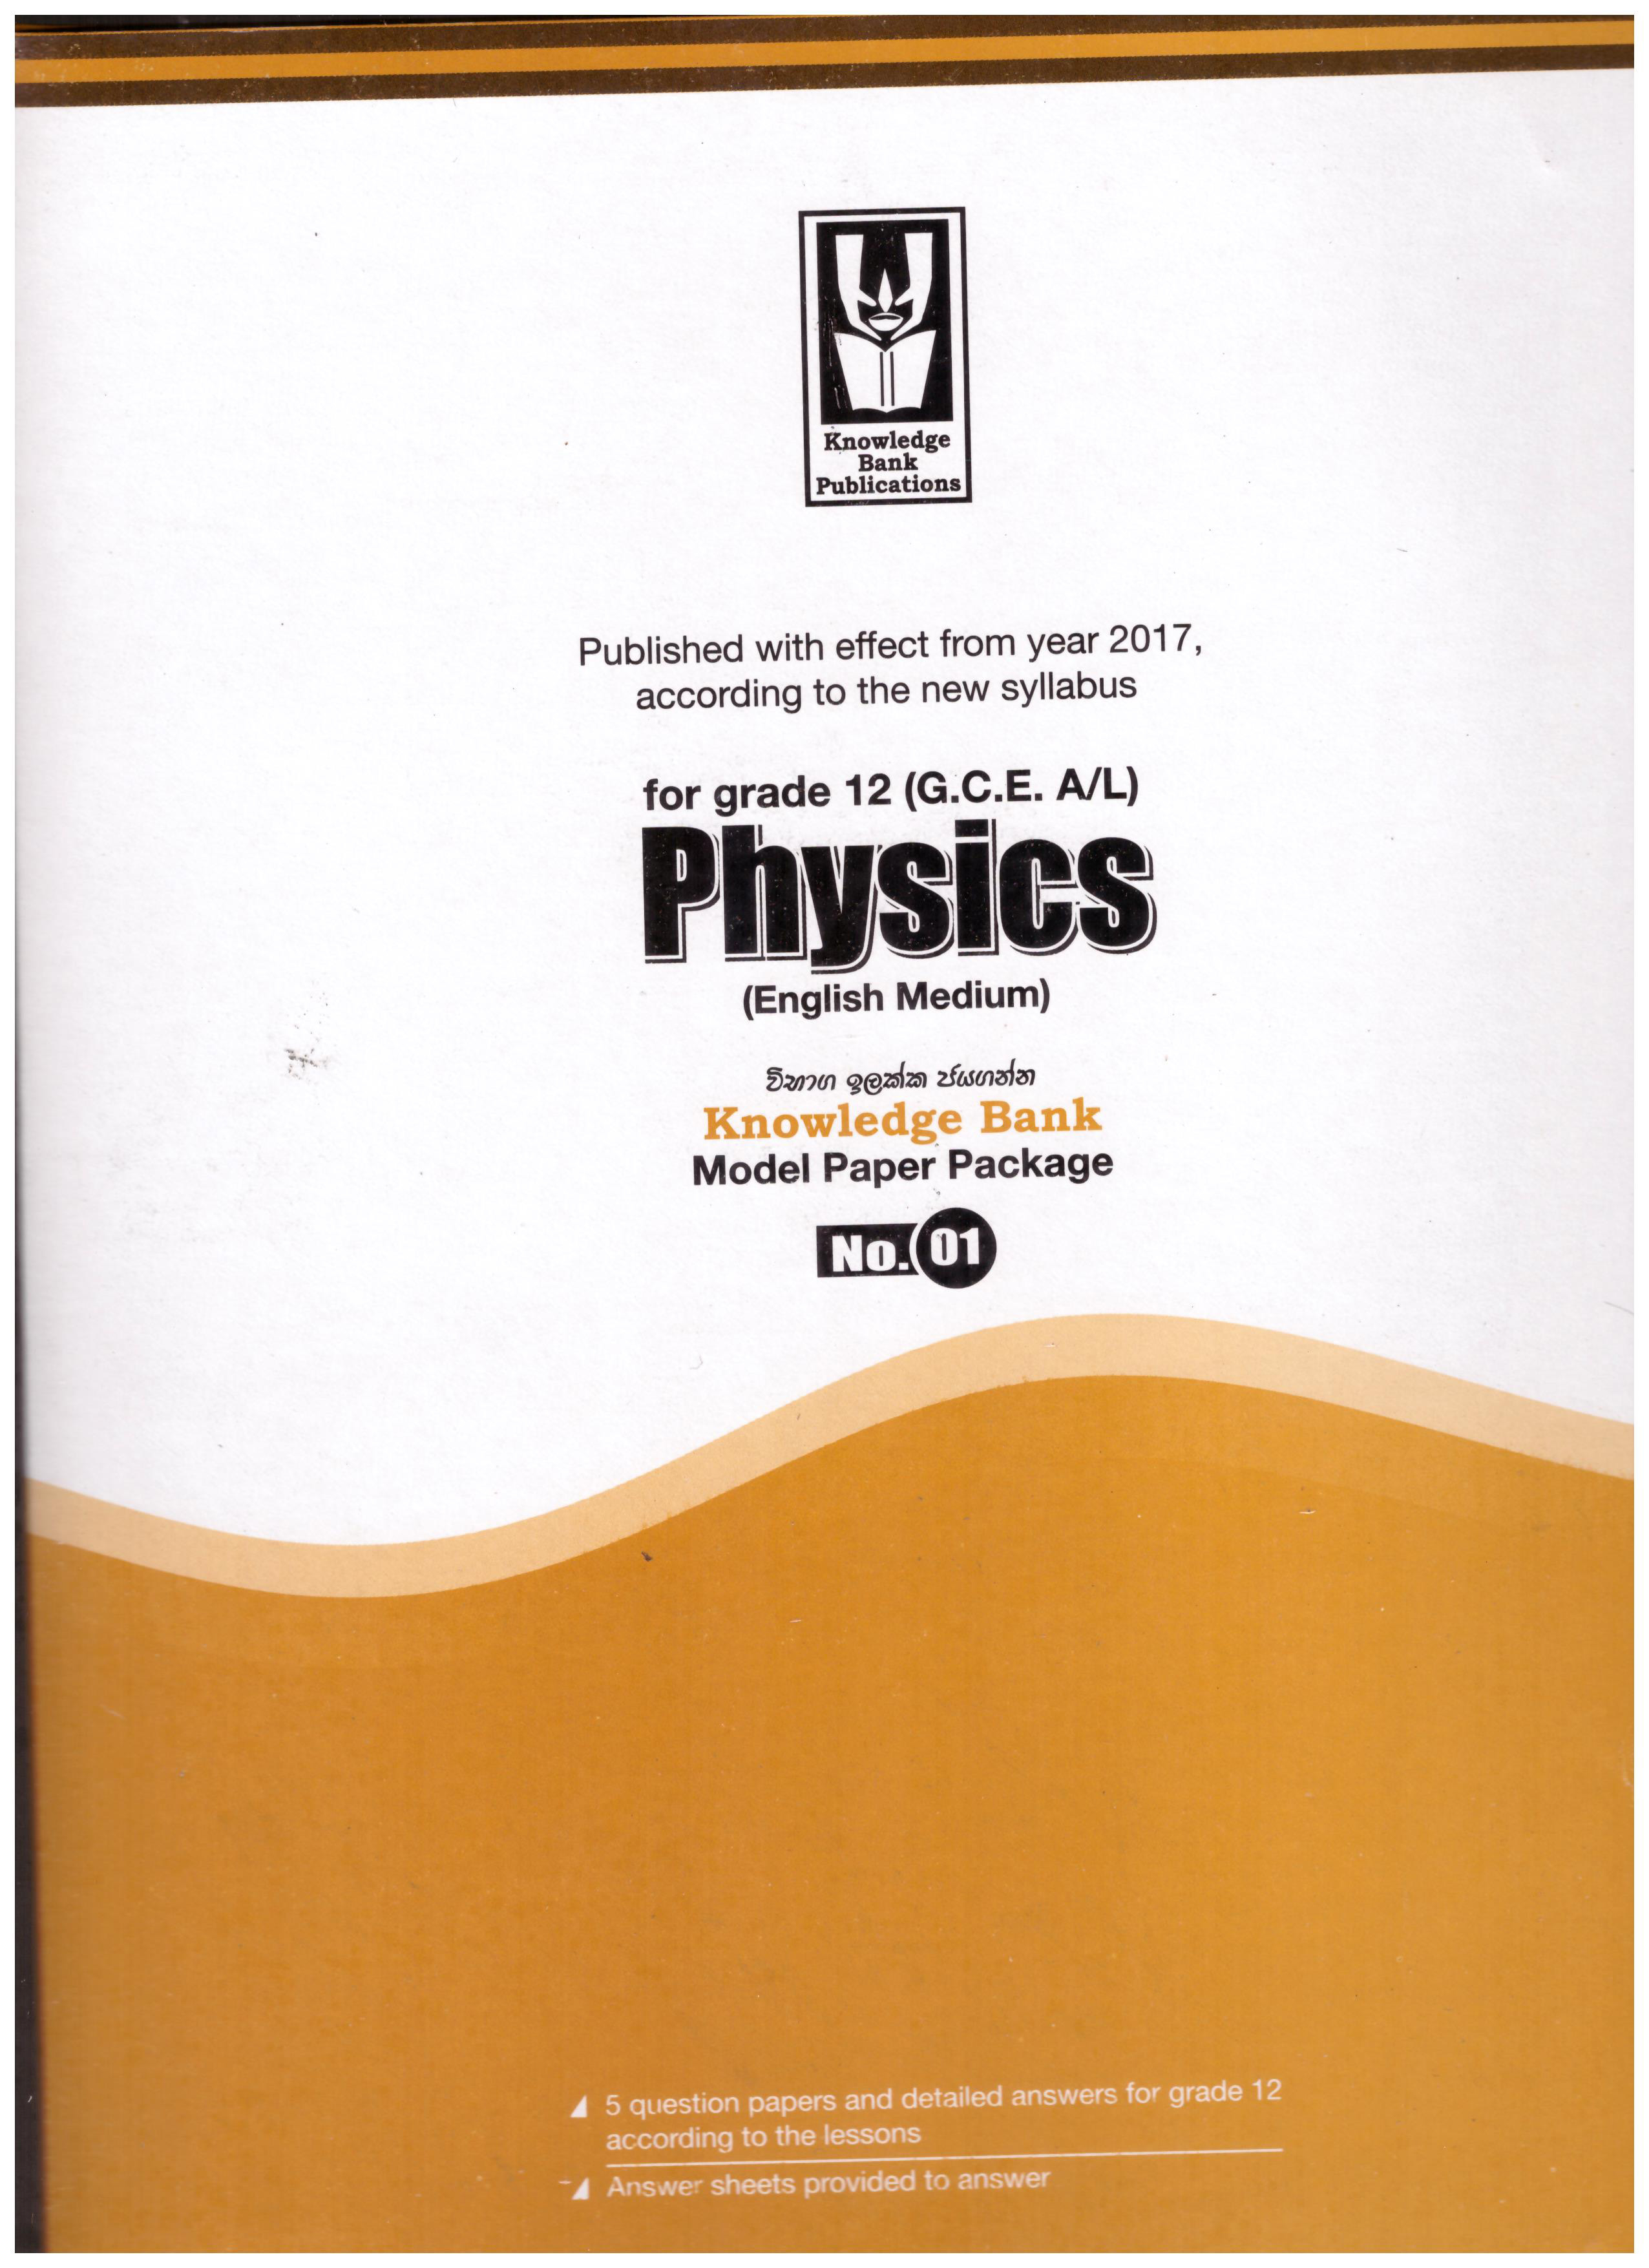 Knowledge Bank A/L Physics No.01 (For Grade 12)  Model Paper Package